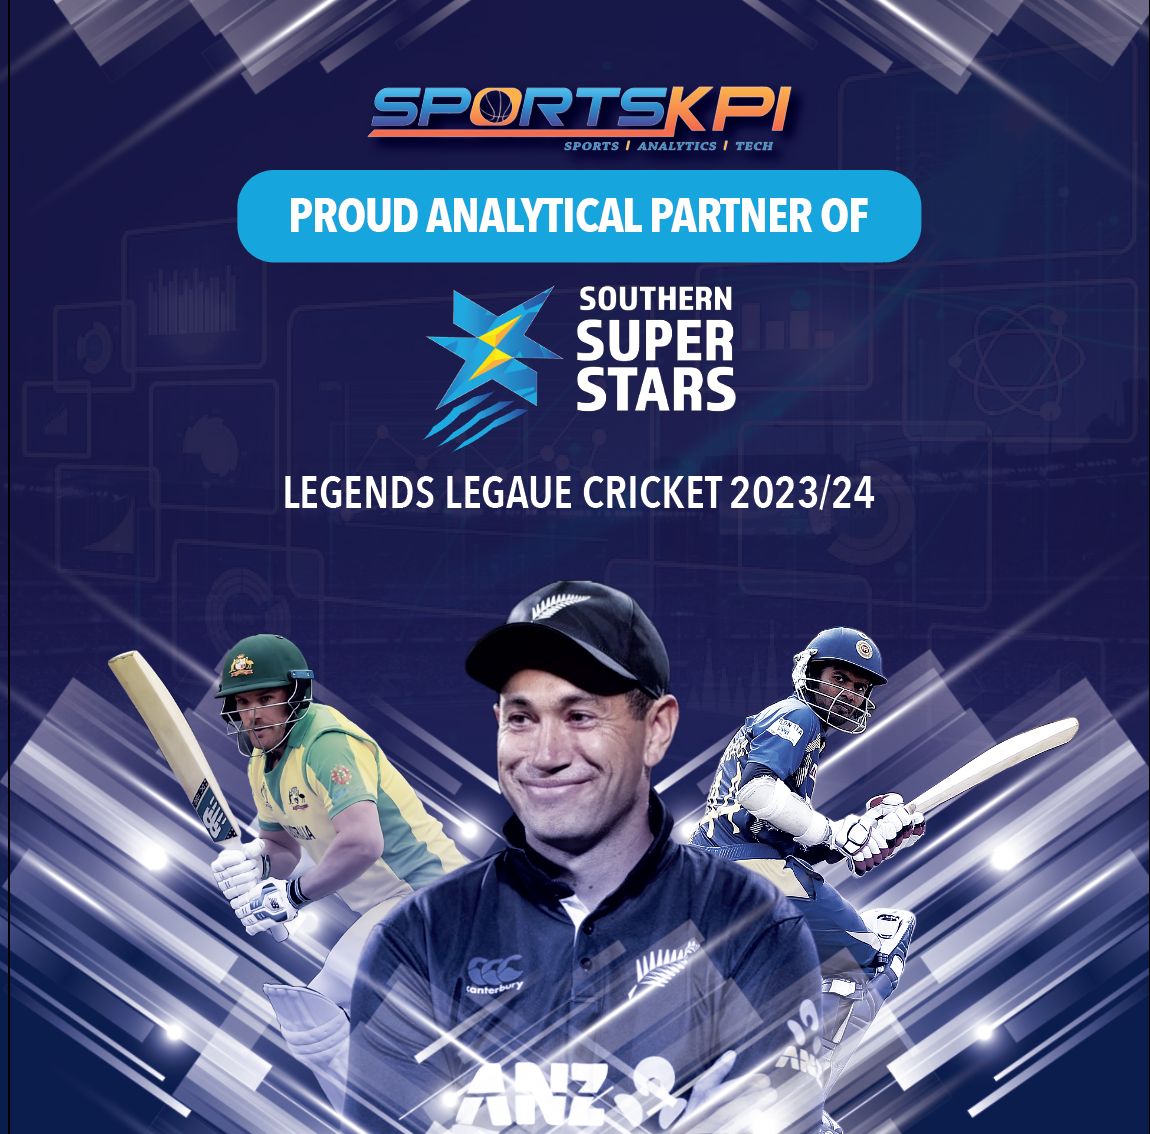 SportsKPI And Southern SuperStars Team Up For An Analytical Partnership